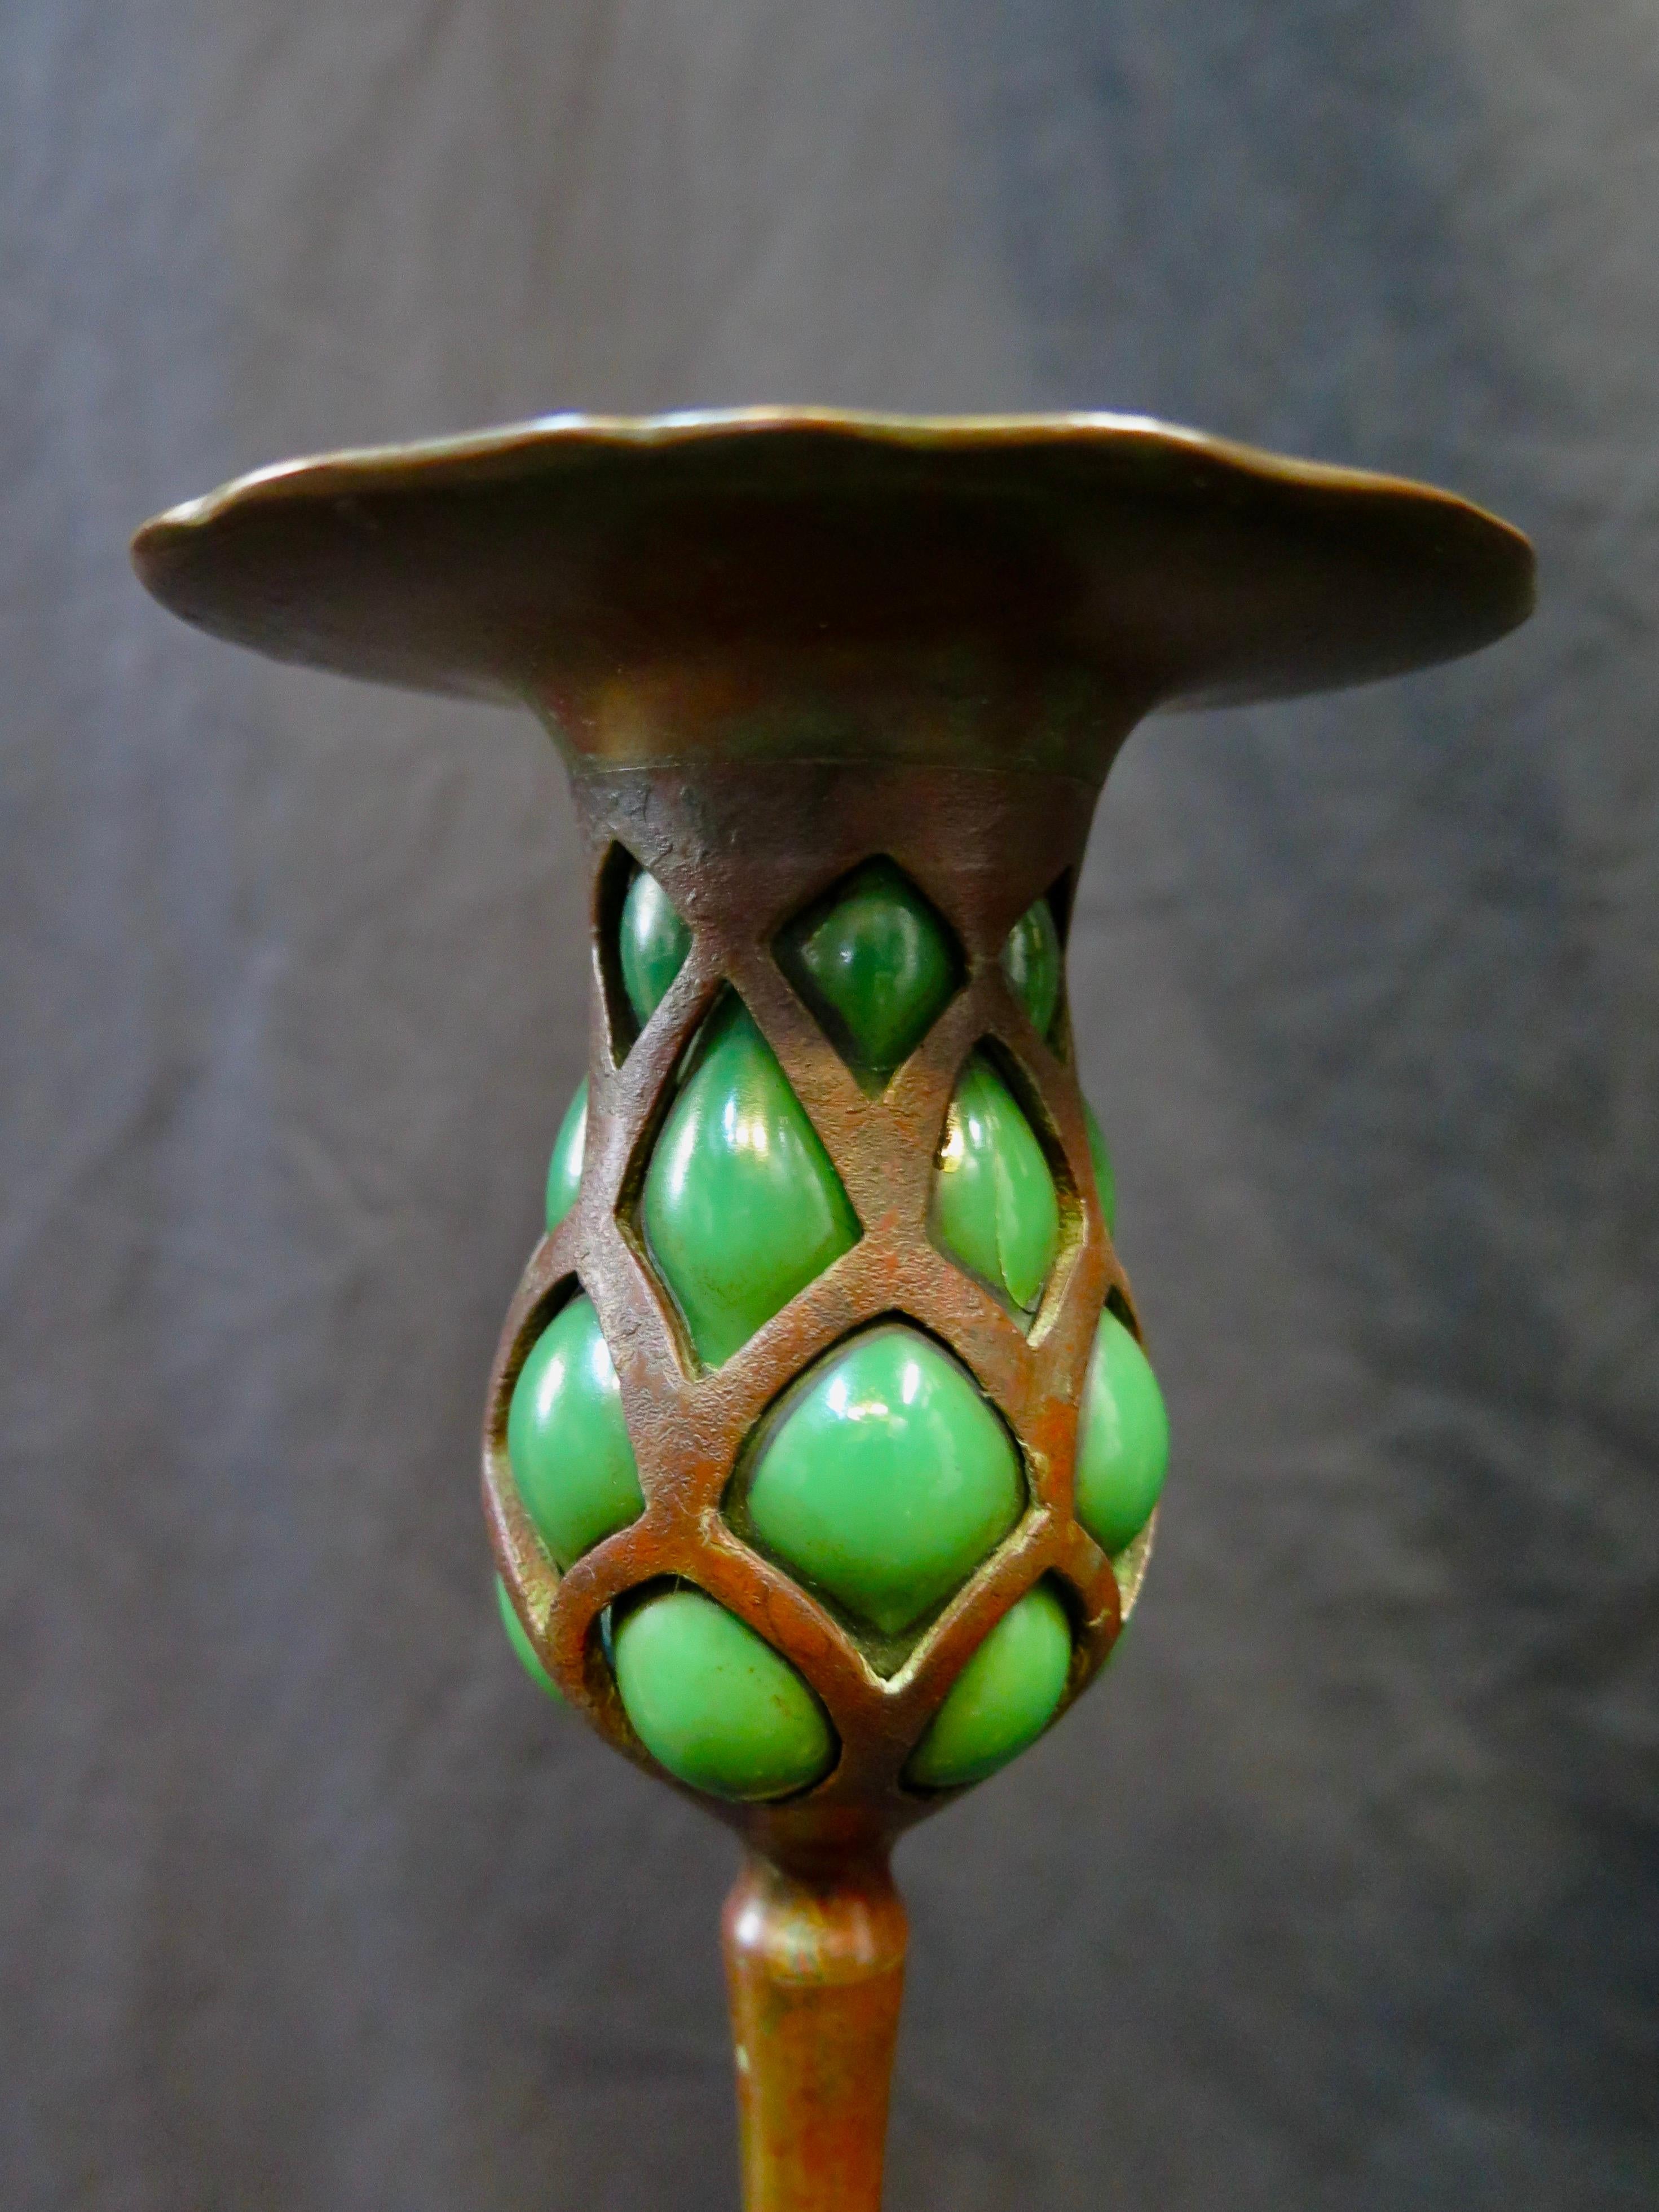 This tall & elegant patinated bronze early Tiffany Studios candlestick dates from circa 1900. It is a wonderfully preserved vintage decorative candlestick with a wide built in bobéches beautifully accenting the elongated green glass blown out bronze